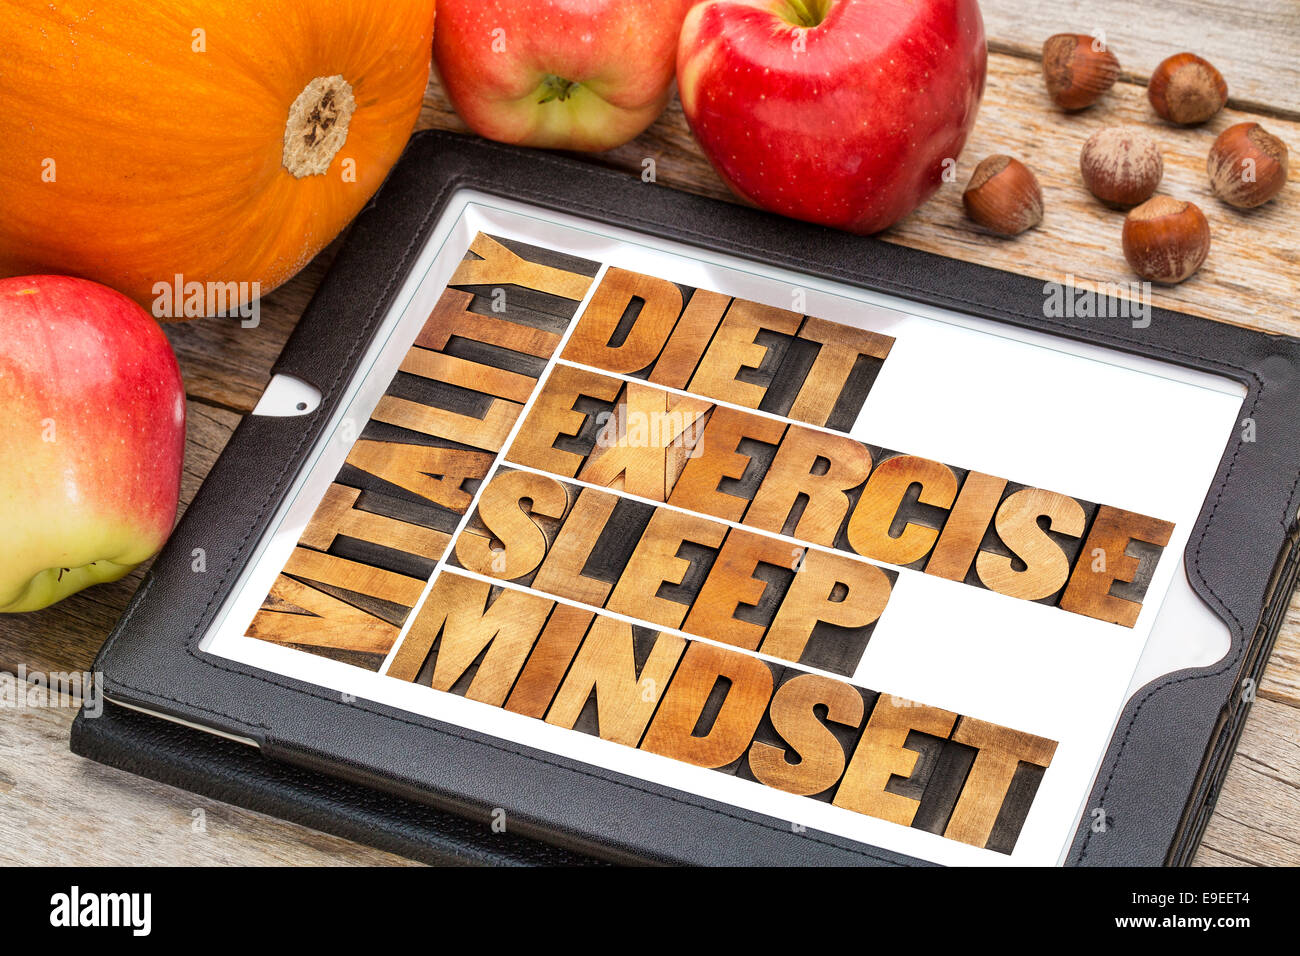 diet, sleep, exercise and mindset - vitality concept - abstract in vintage letterpress wood type on a digital tablet with apples Stock Photo